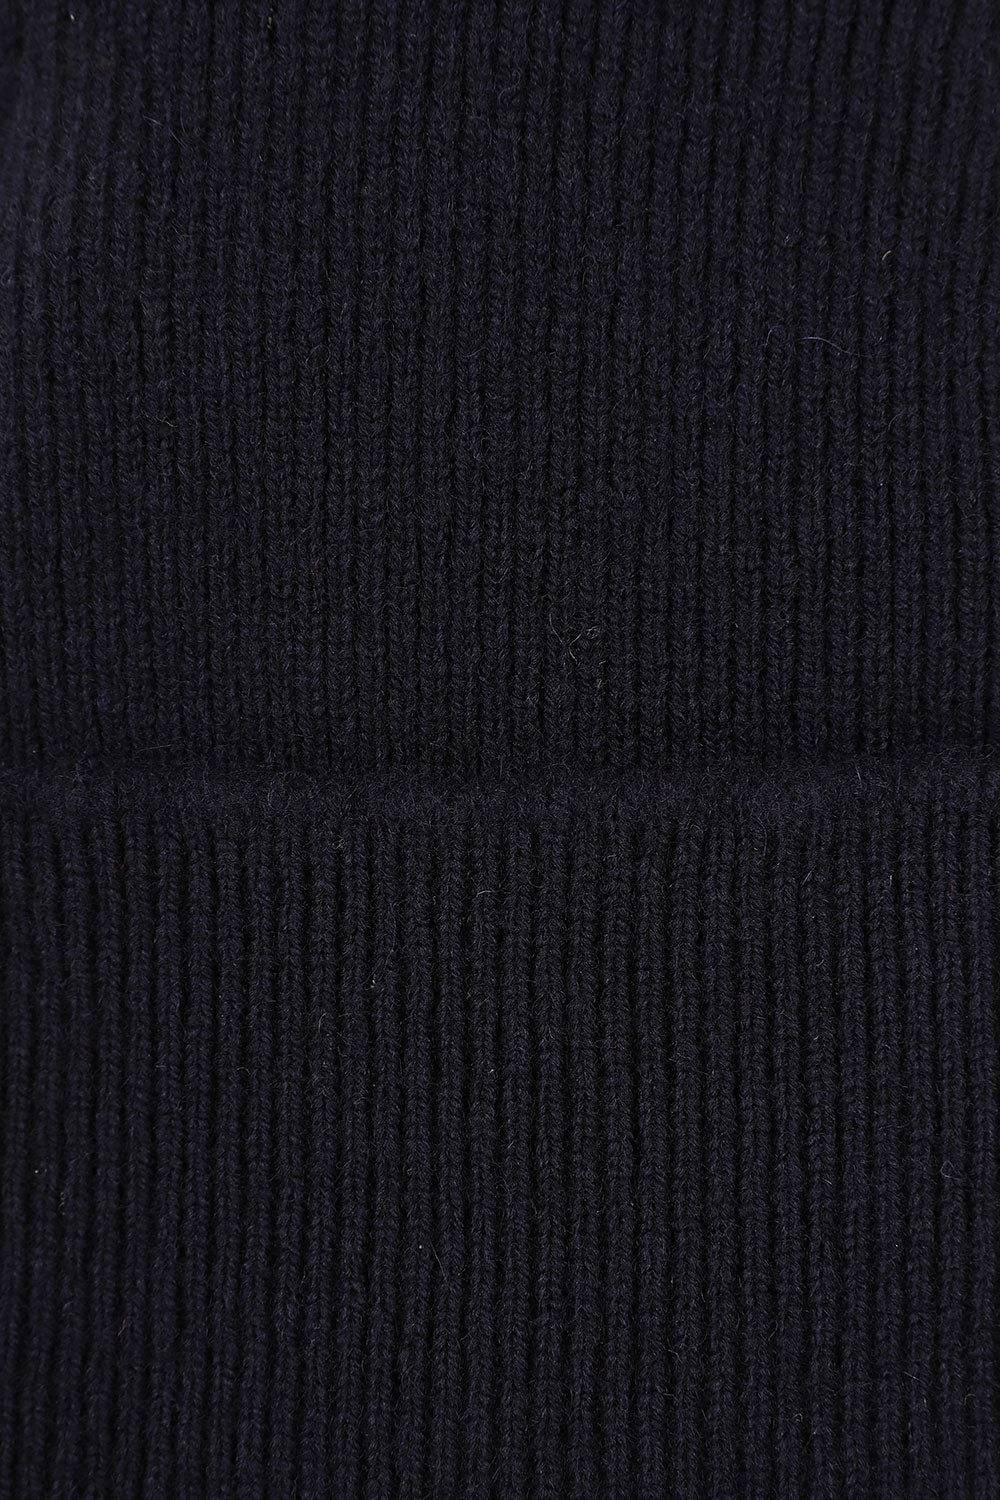 Close-up view of Uskees 4004 navy-blue wool hat, showing the texture of the natural lambswool.